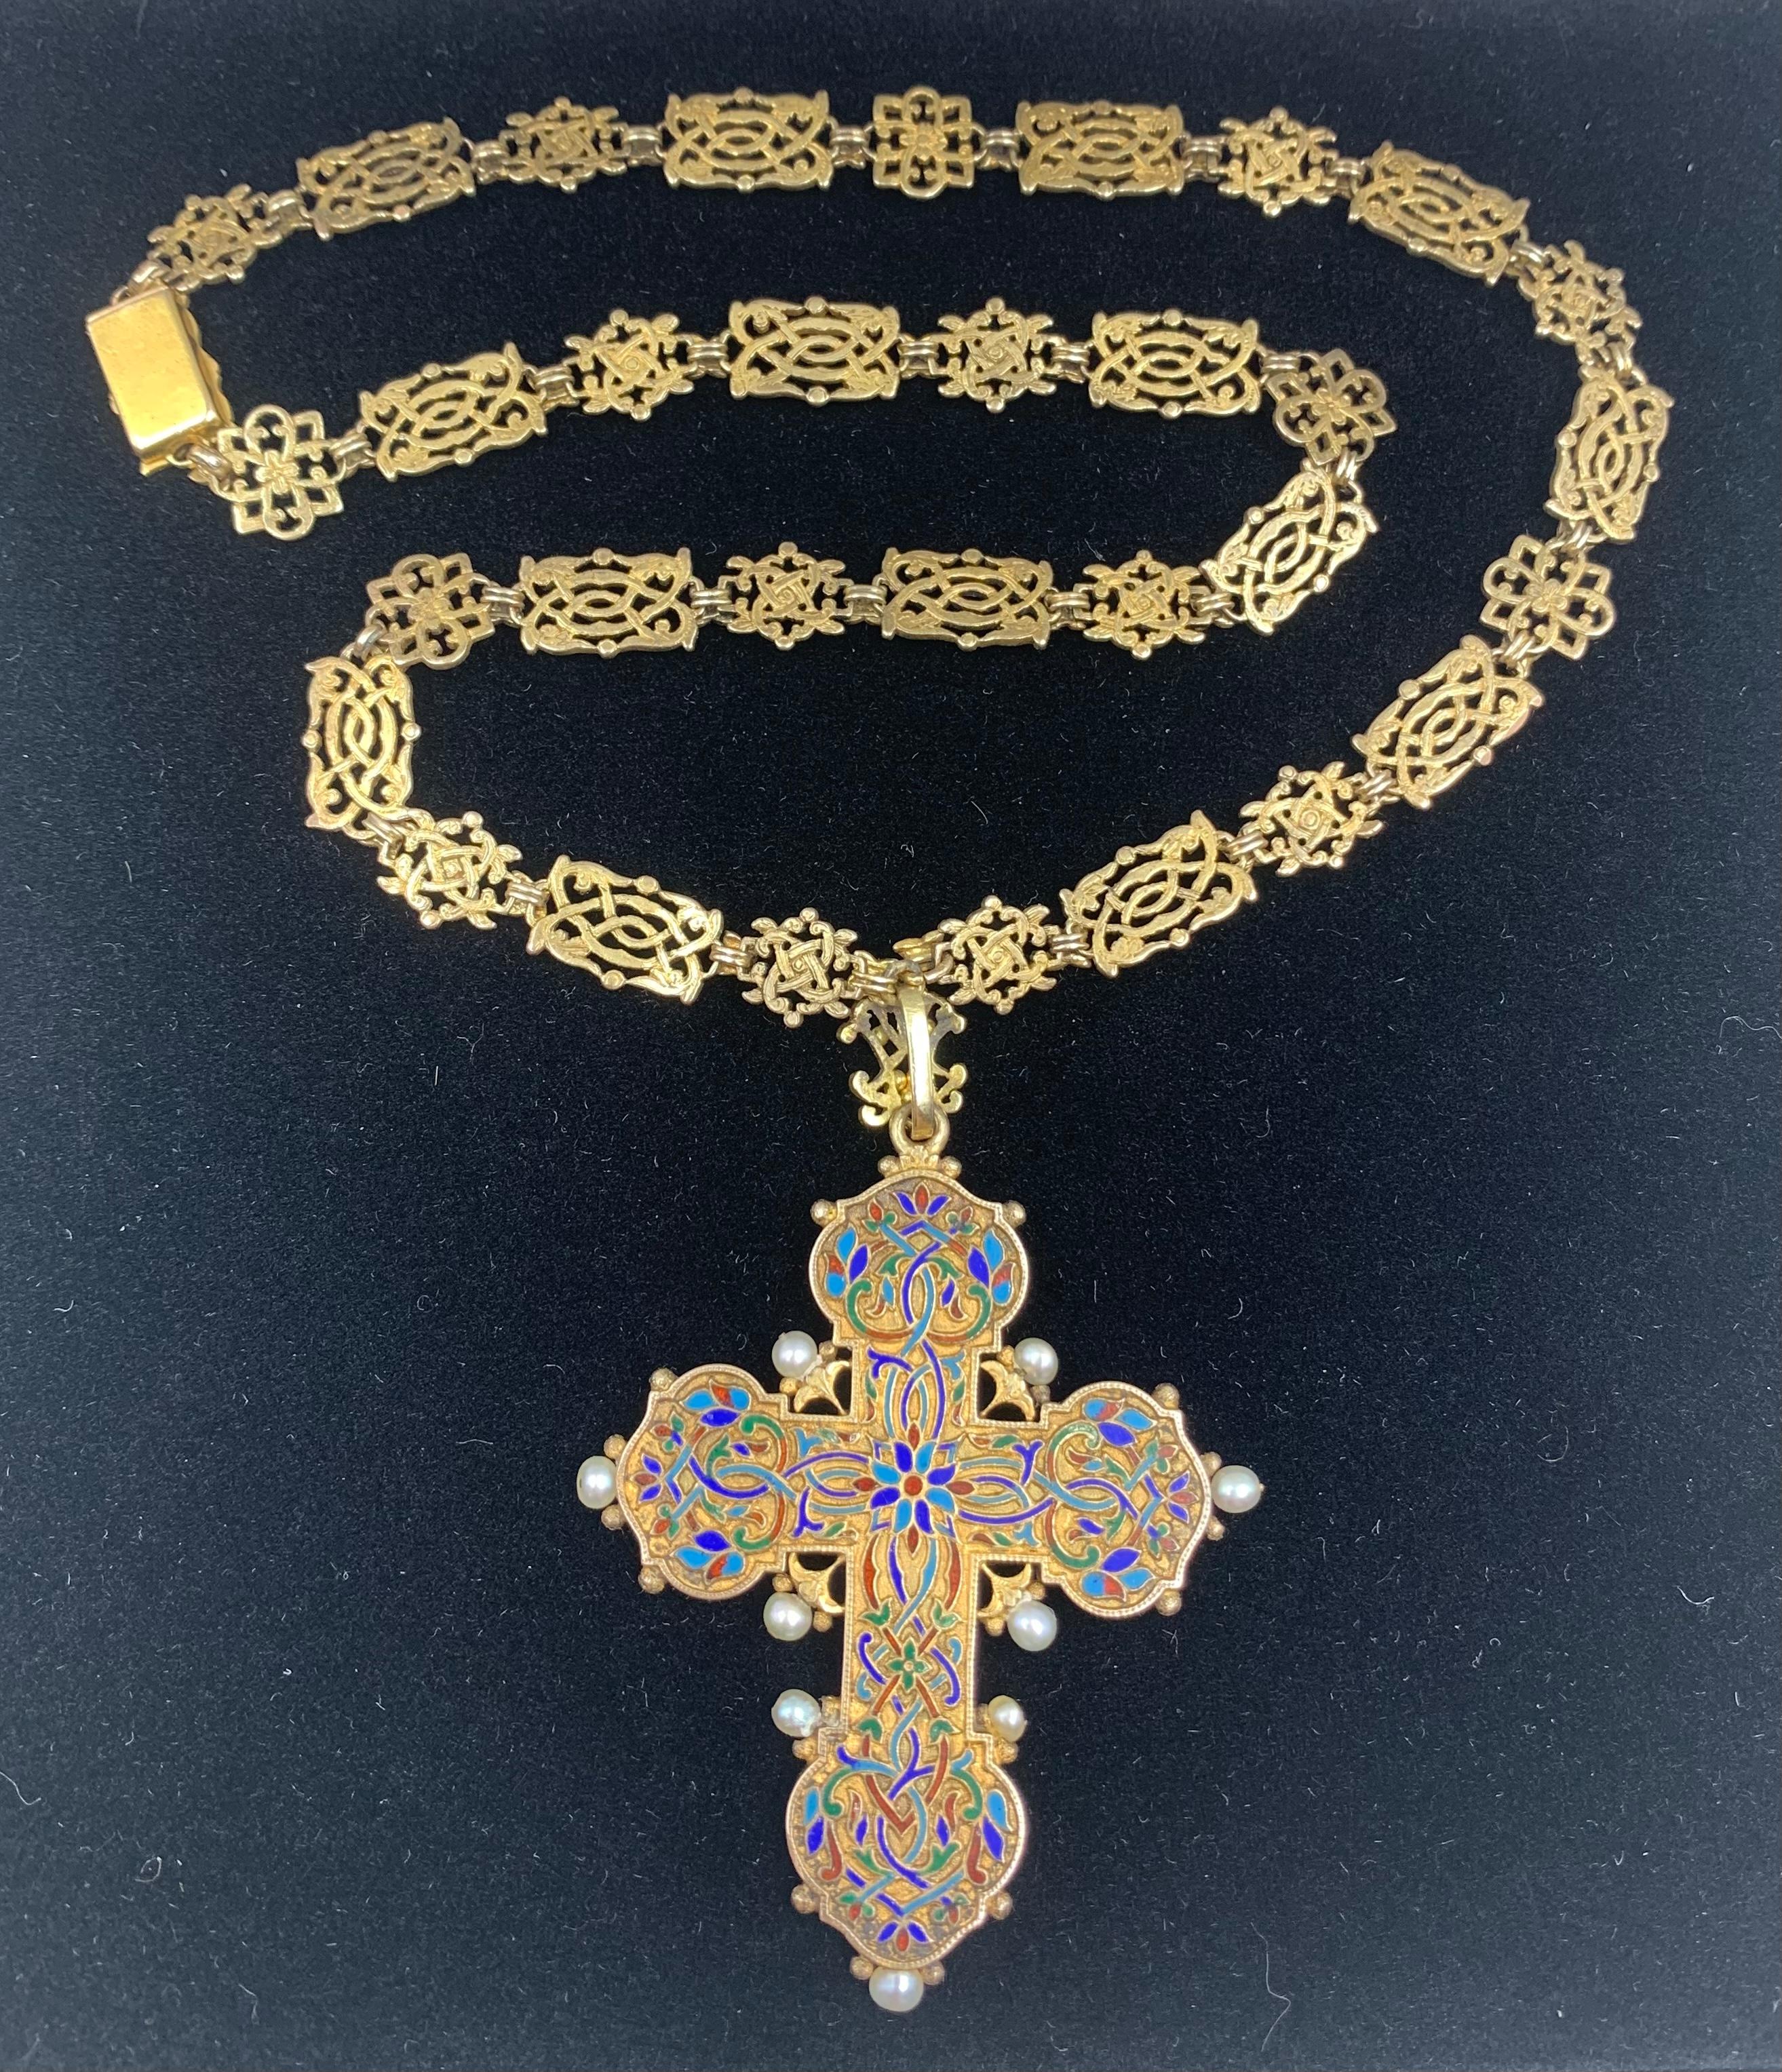 dolce and gabbana cross necklace